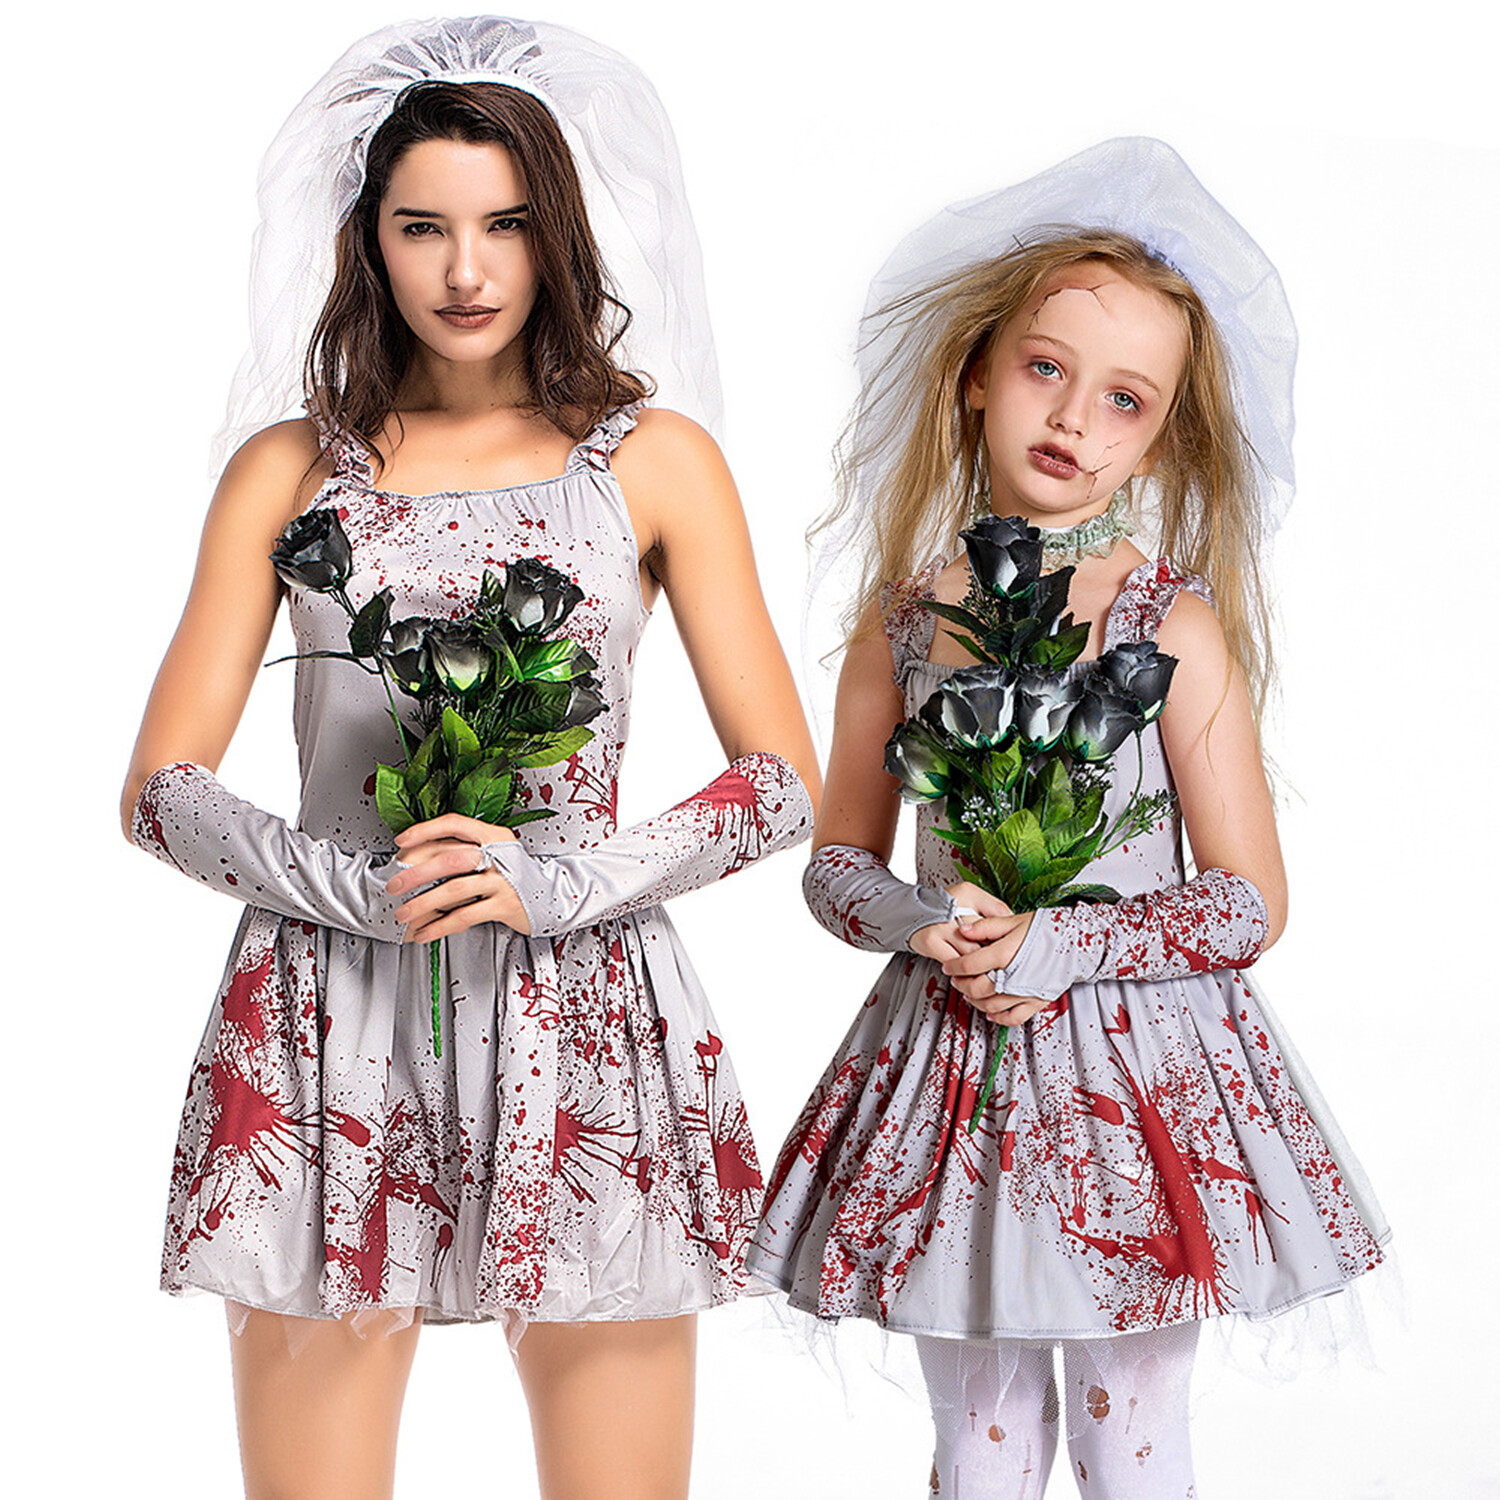 Phenas Girls Scary Bloody Ghost Bride Halloween Costume Horror Ghost Cosplay Dress-up - image 5 of 7